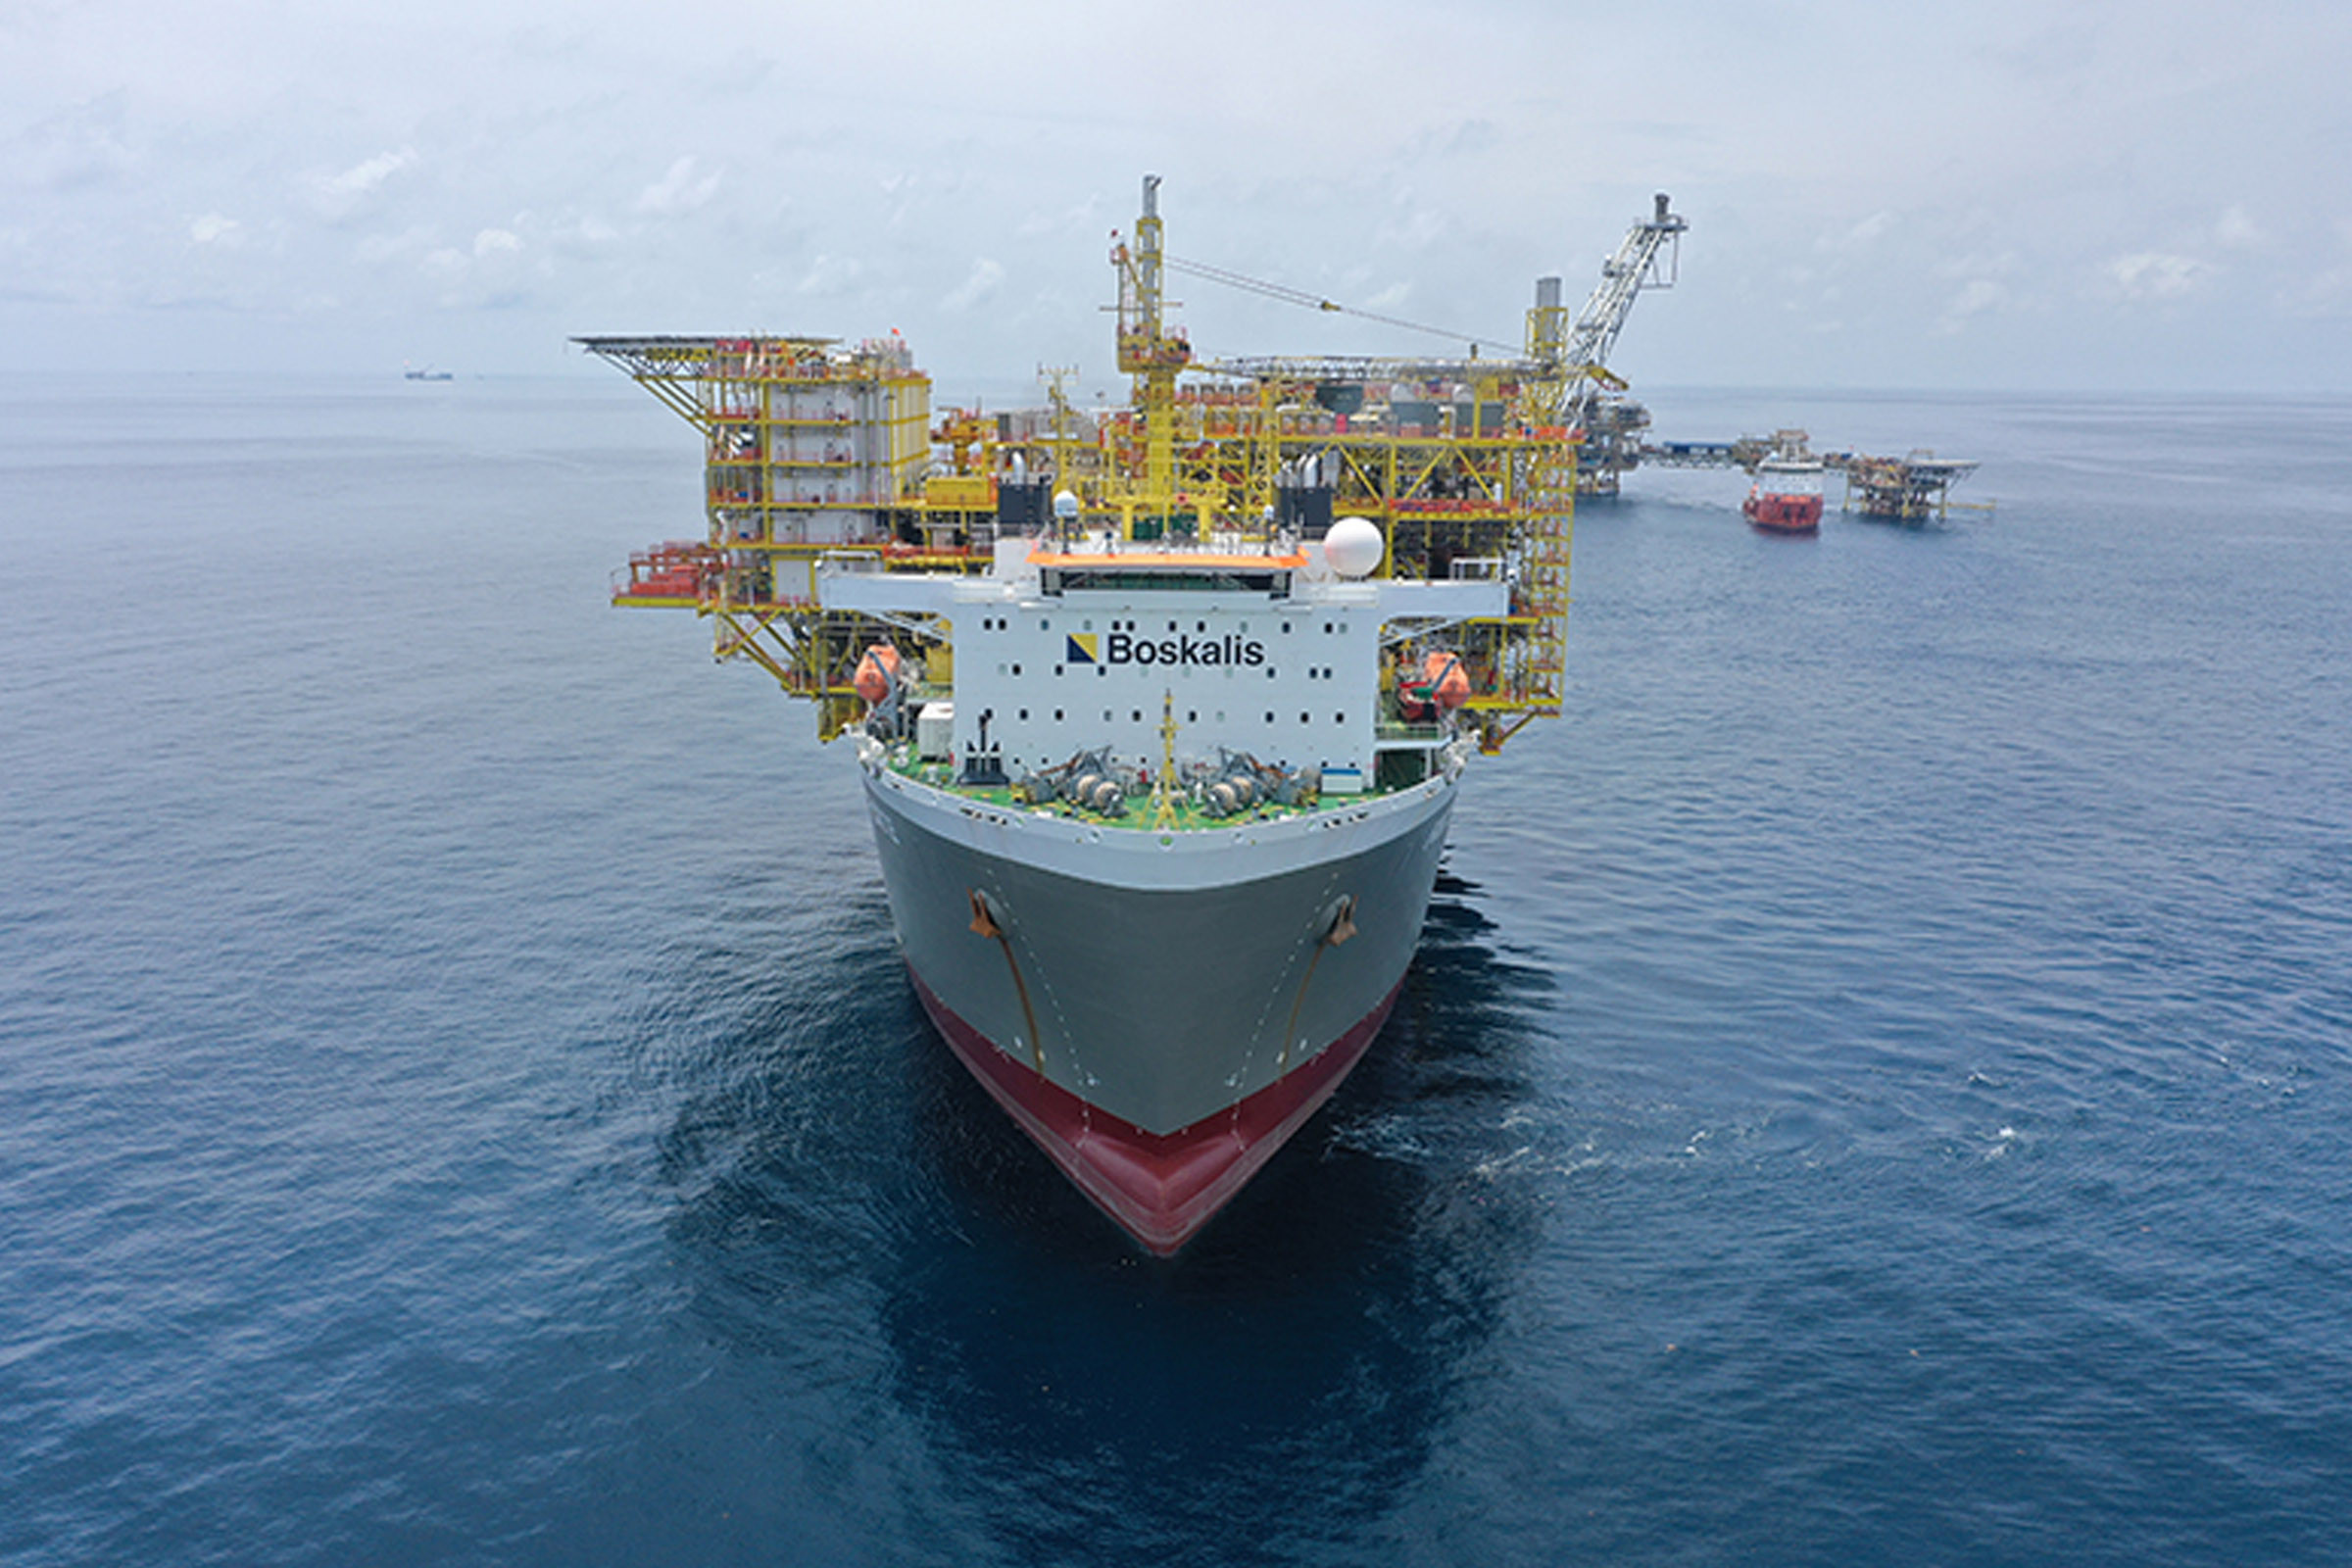 Boskalis’ semi-submersible heavy transport vessel Forte carrying the 11,238-ton topside